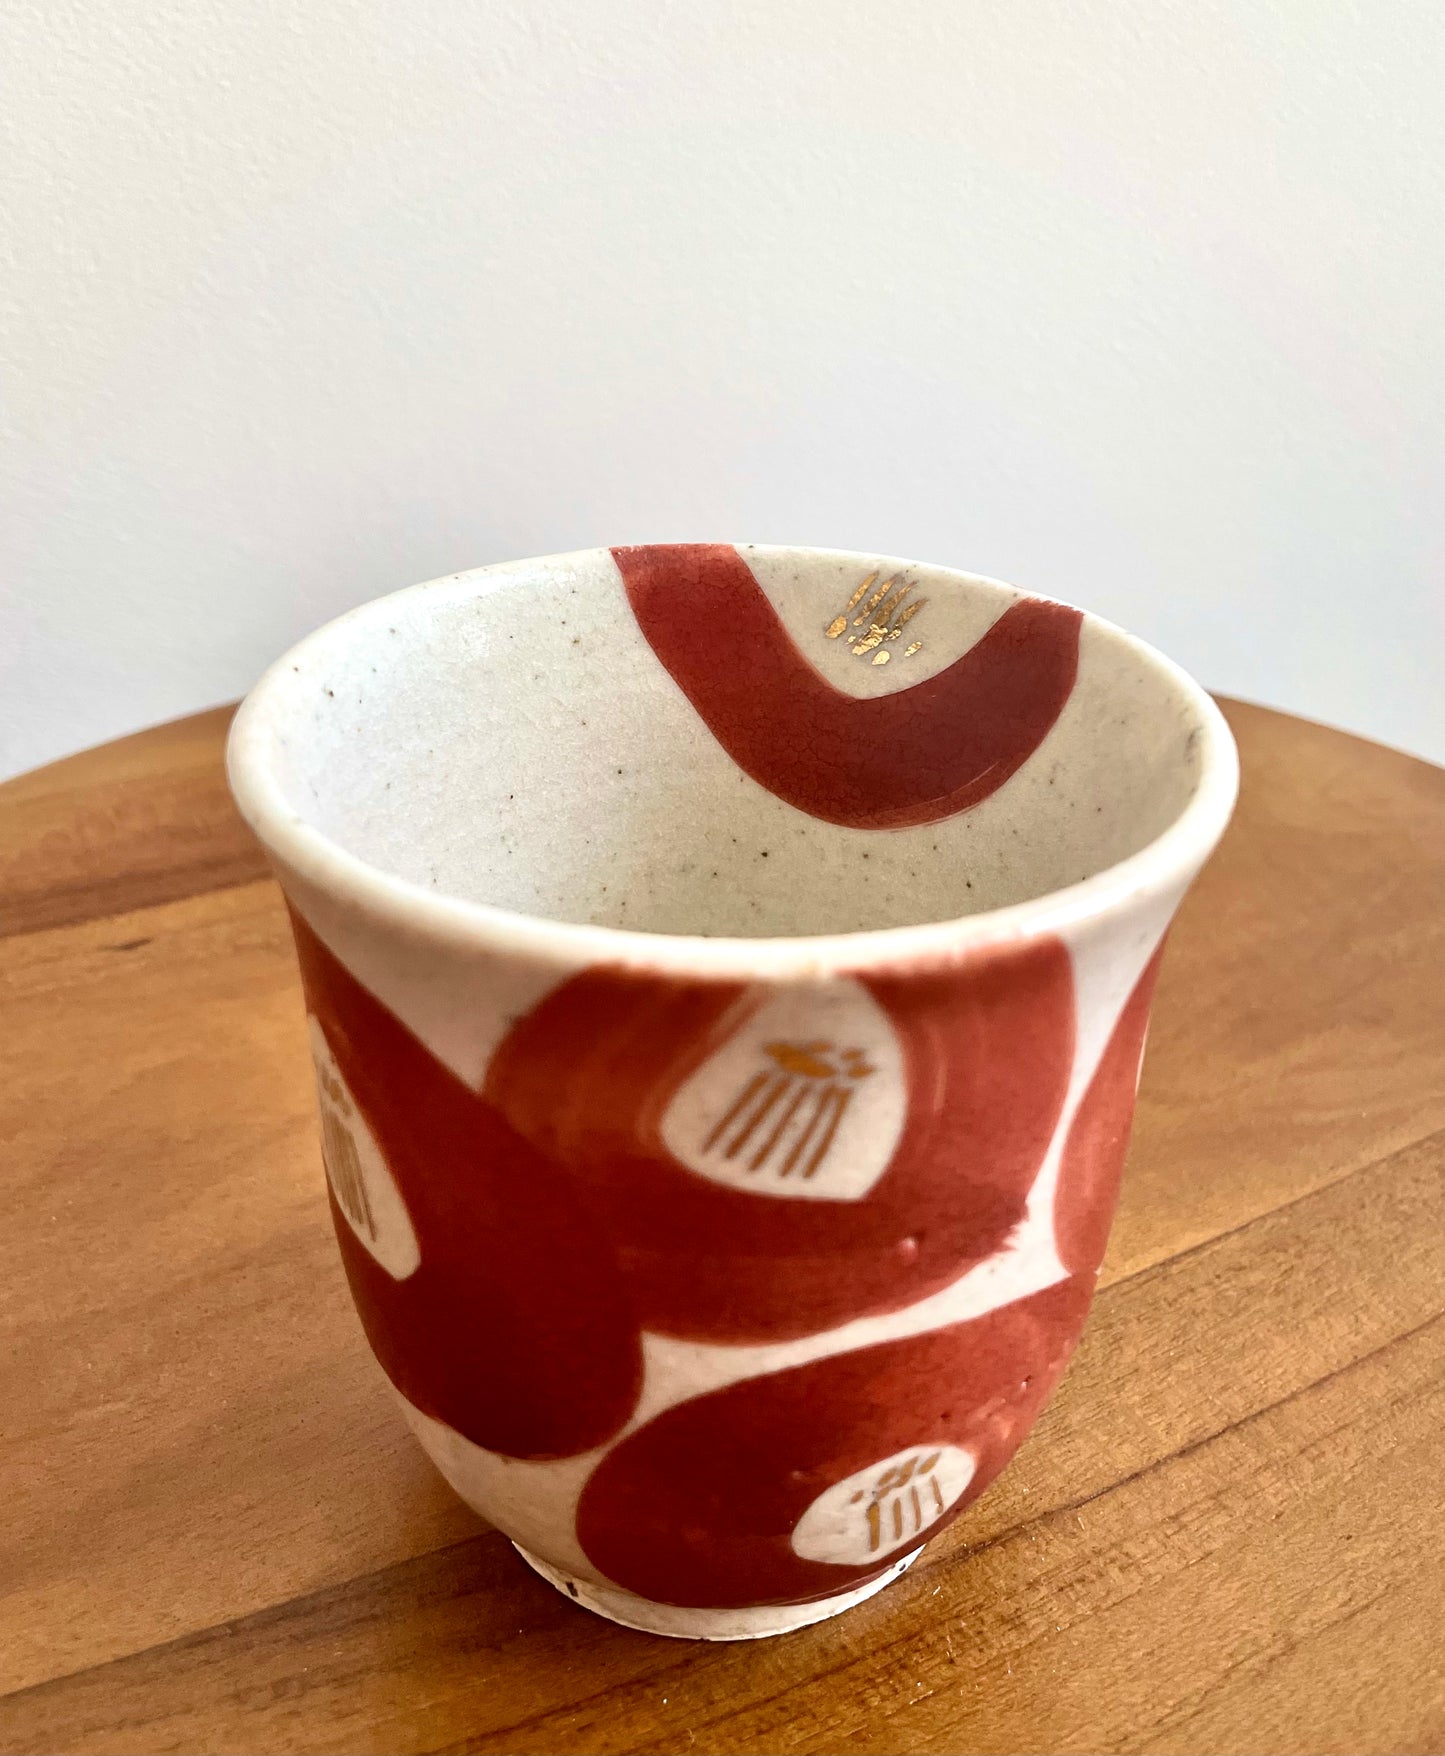 Zoho Gama Red Flower Print Tea Cup志野赤椿 湯呑